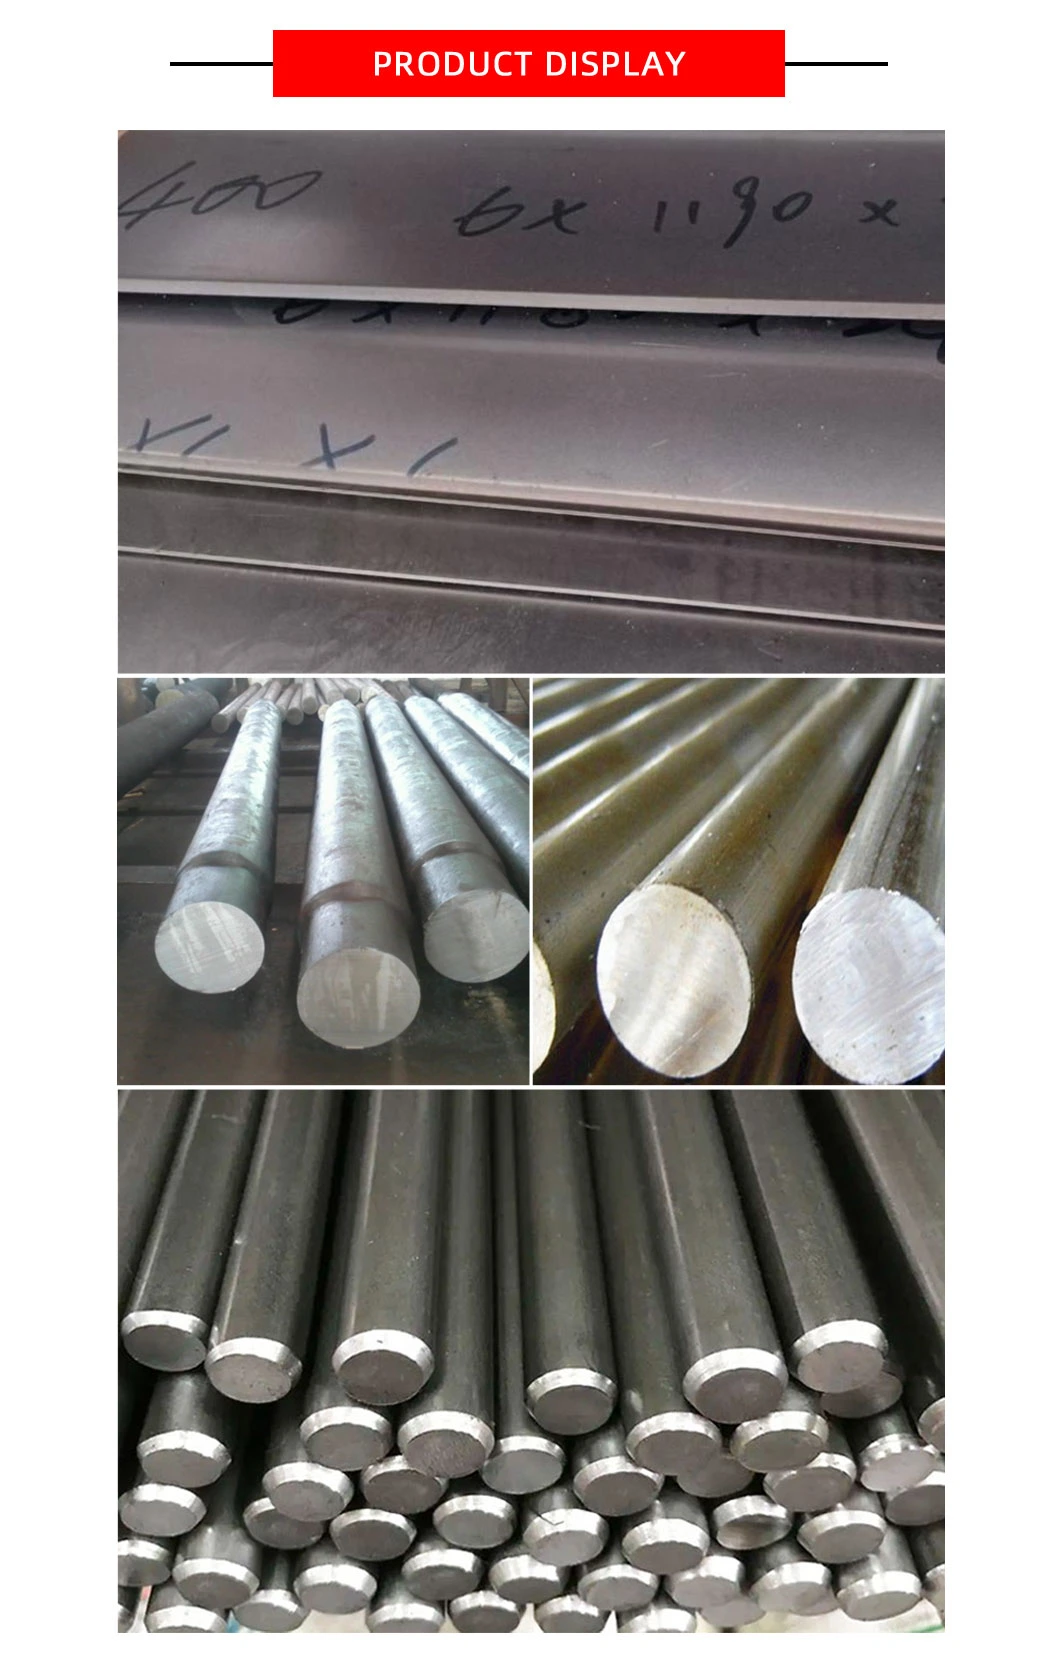 AISI ASTM Nickel Inconel Incoloy Monel Hastelloy Alloy Round Bar (600 601 617 625 686 690 718 738 800 825 925 200 201 K400 K500 X750)